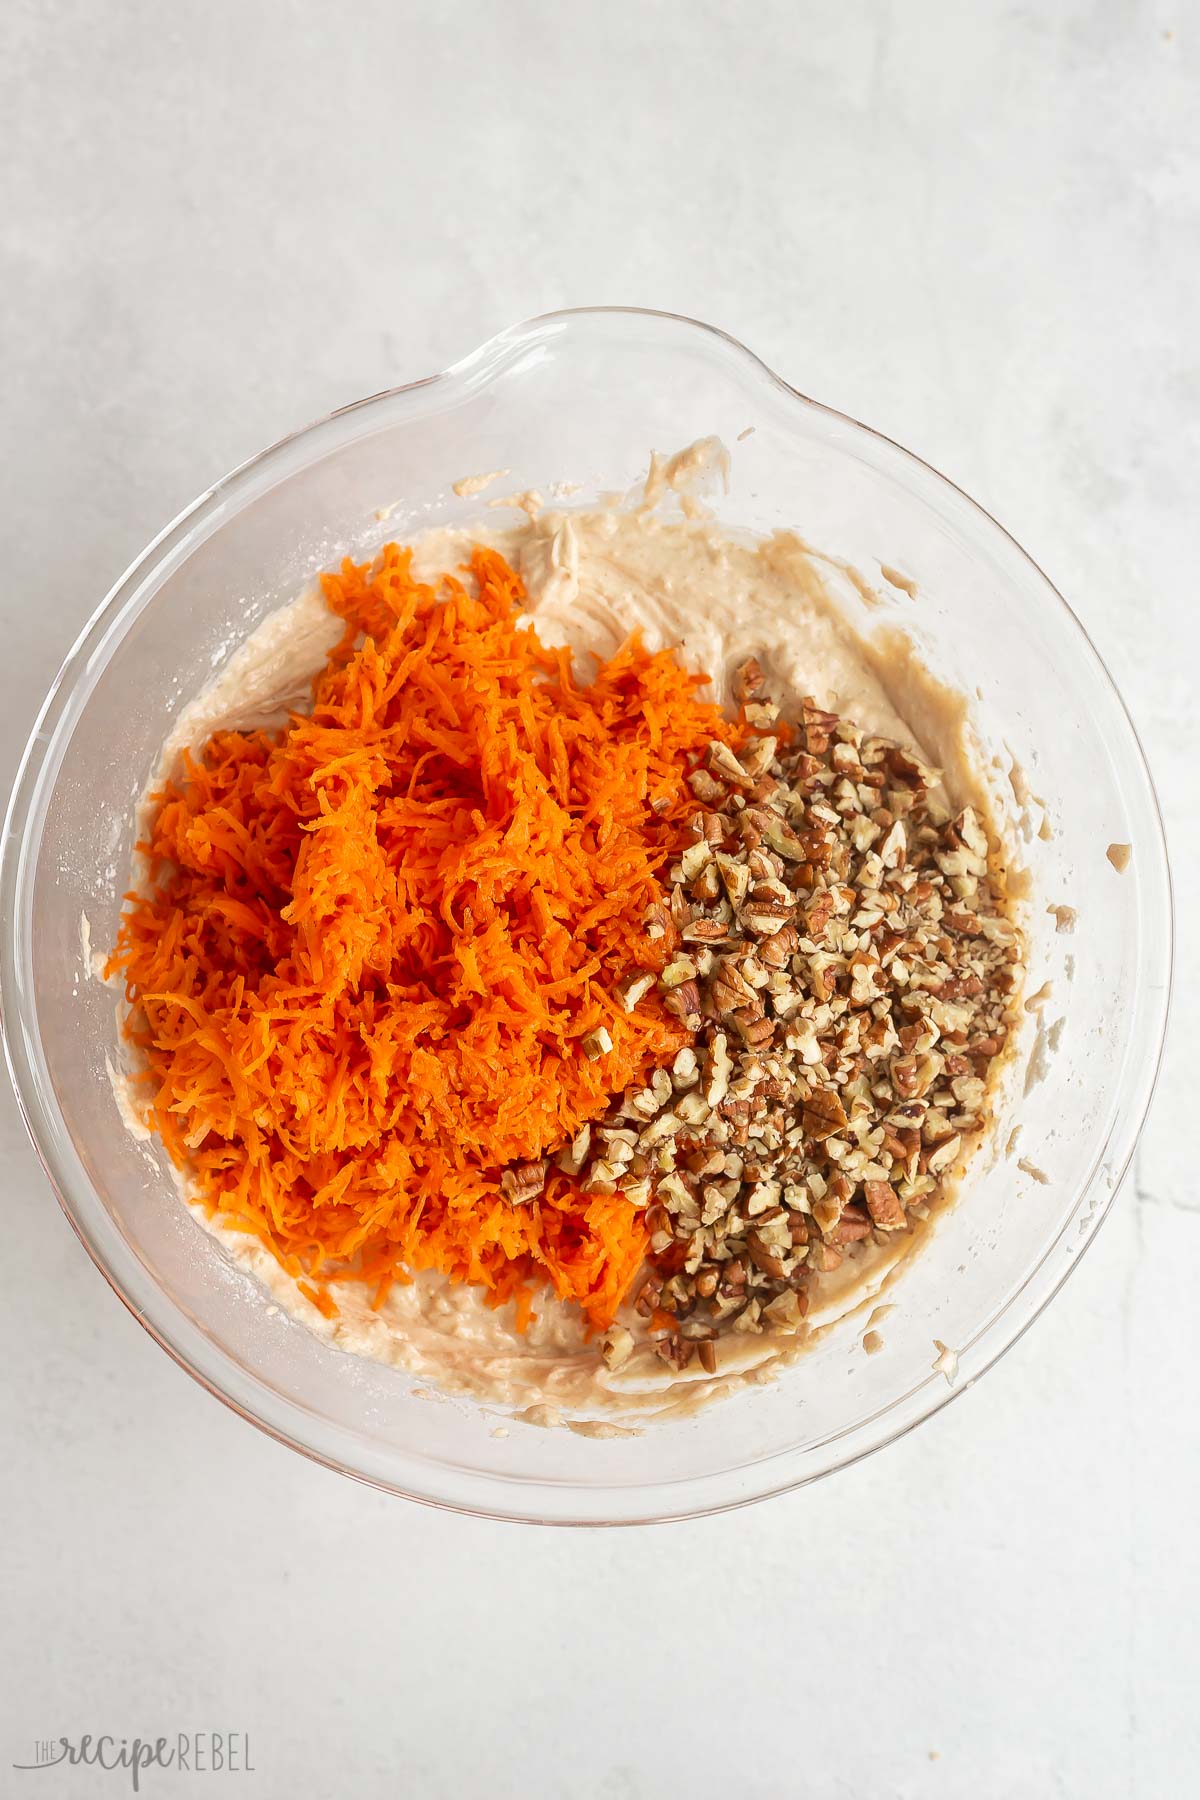 shredded carrots and chopped nuts added to carrot cake batter